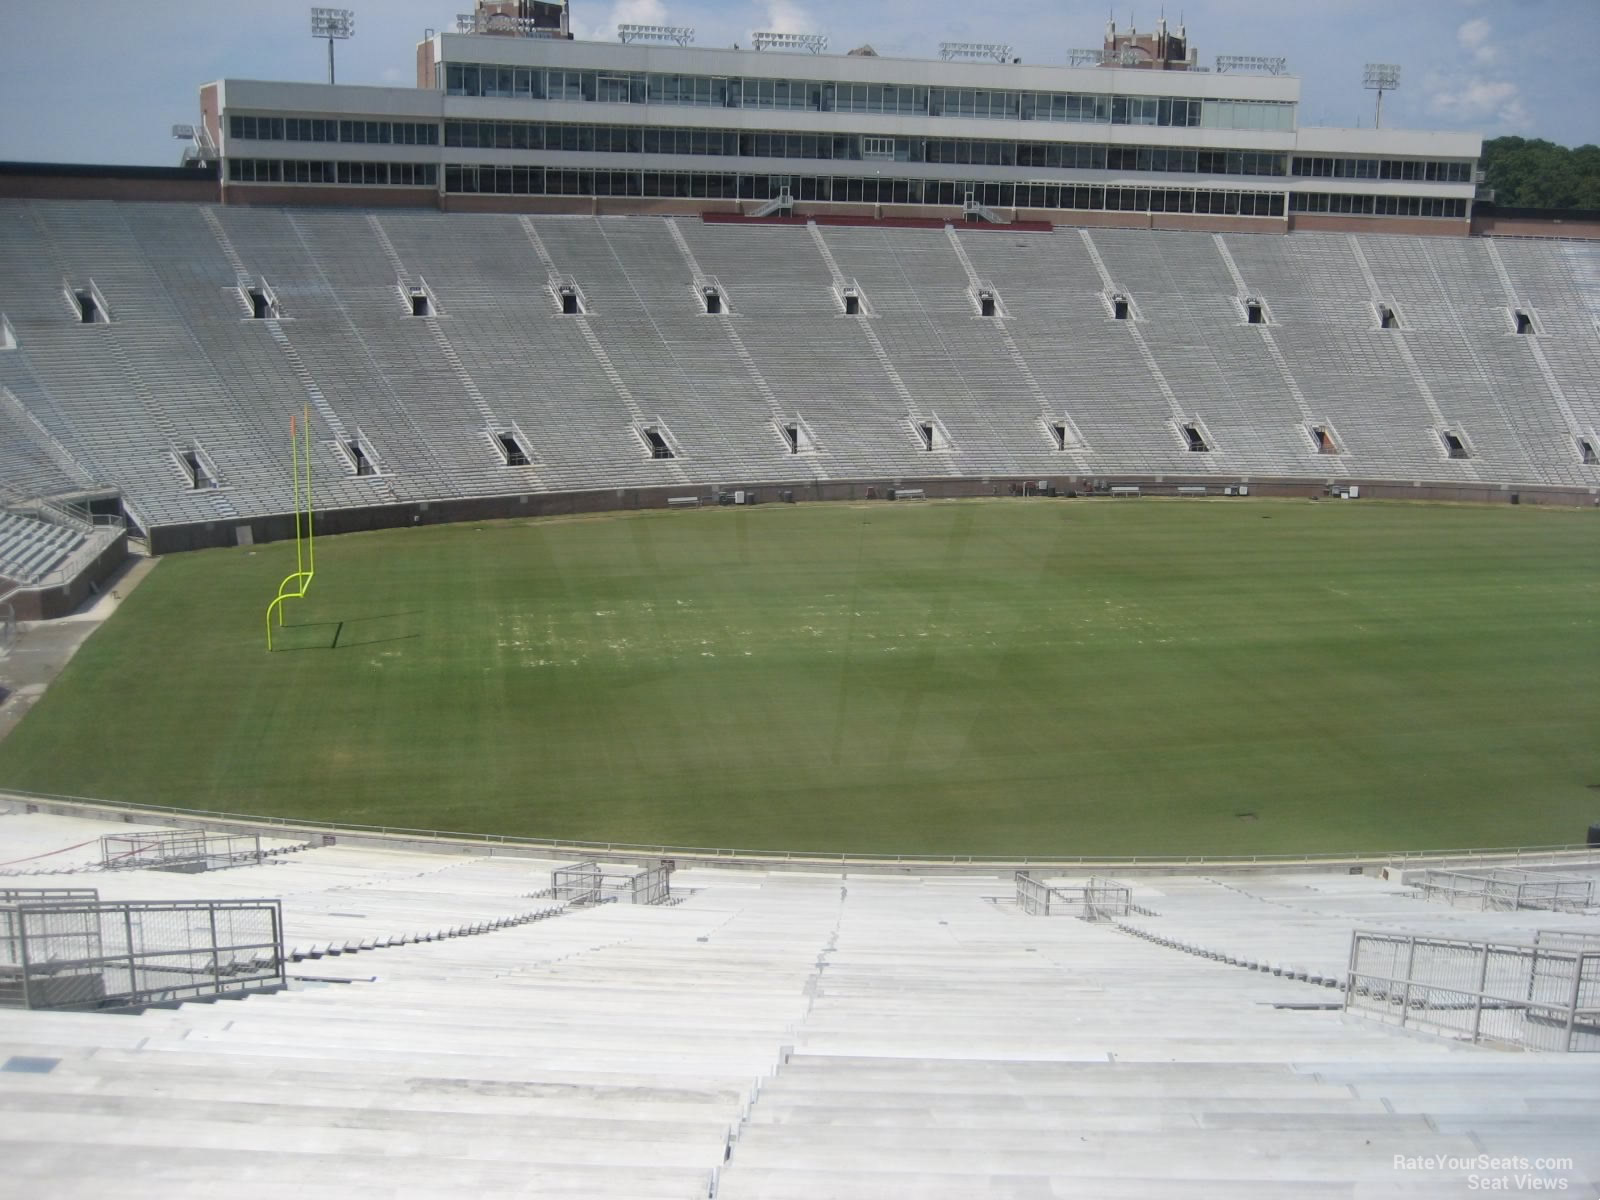 section 13, row 77 seat view  - doak campbell stadium